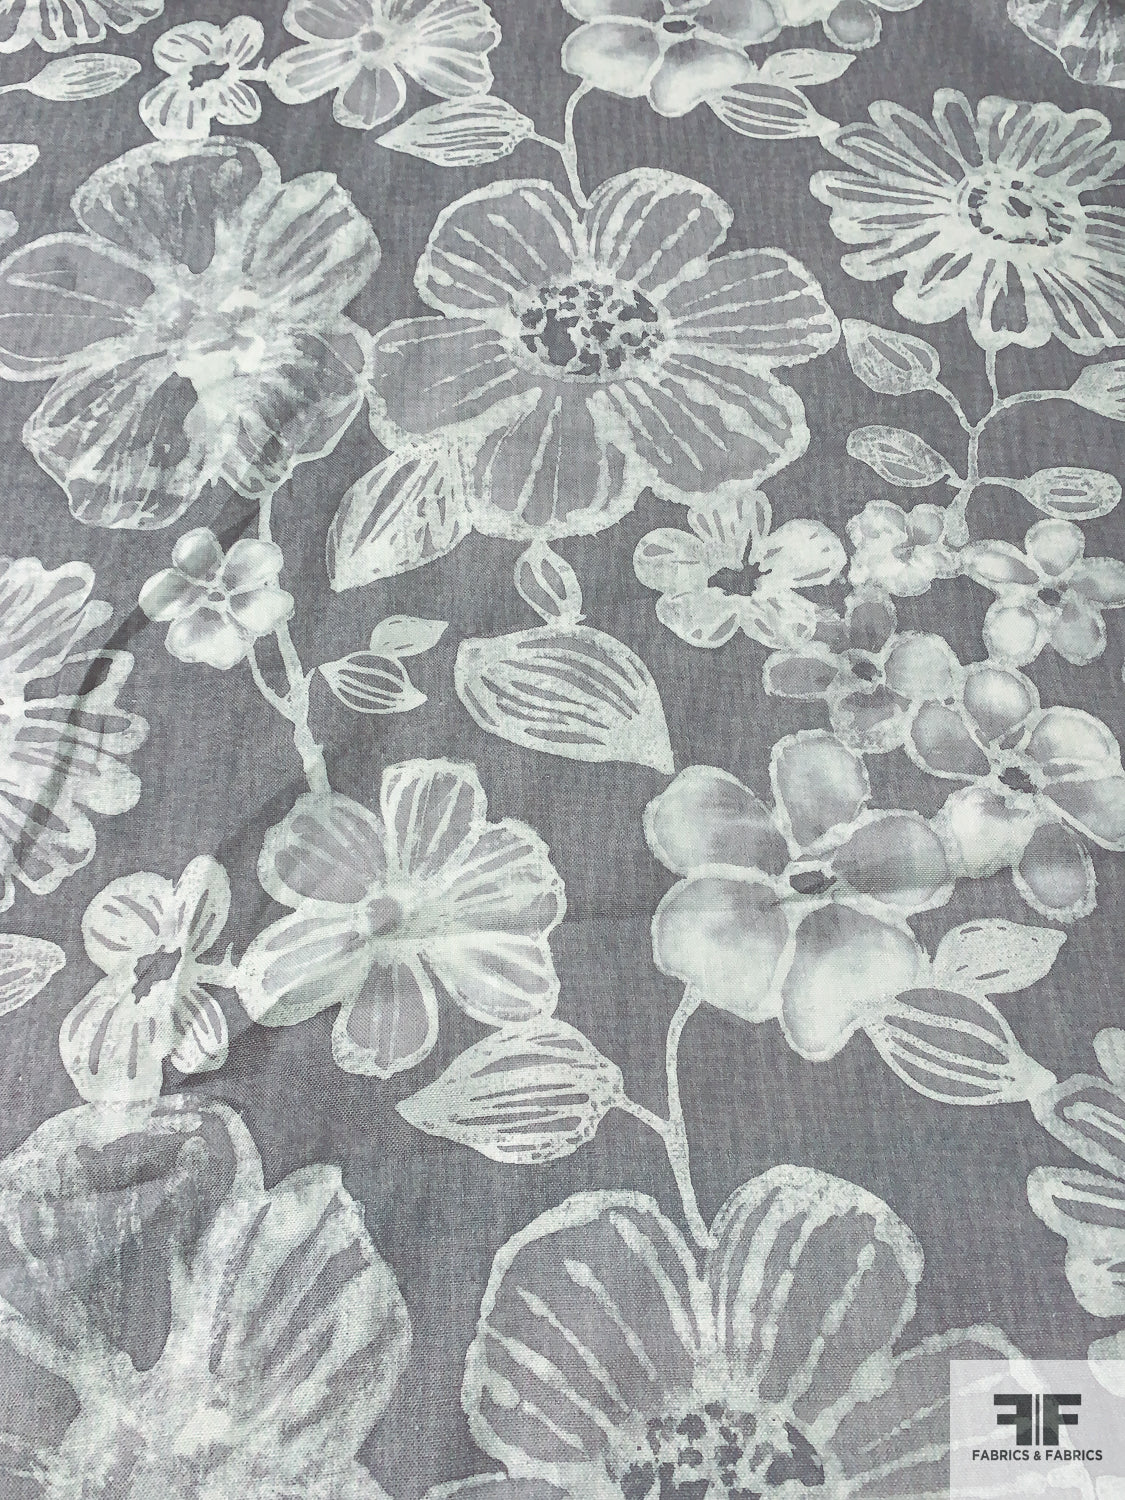 Large-Scale Watercolor Floral Printed Linen-Weave Cotton - Grey/Soft Ivory